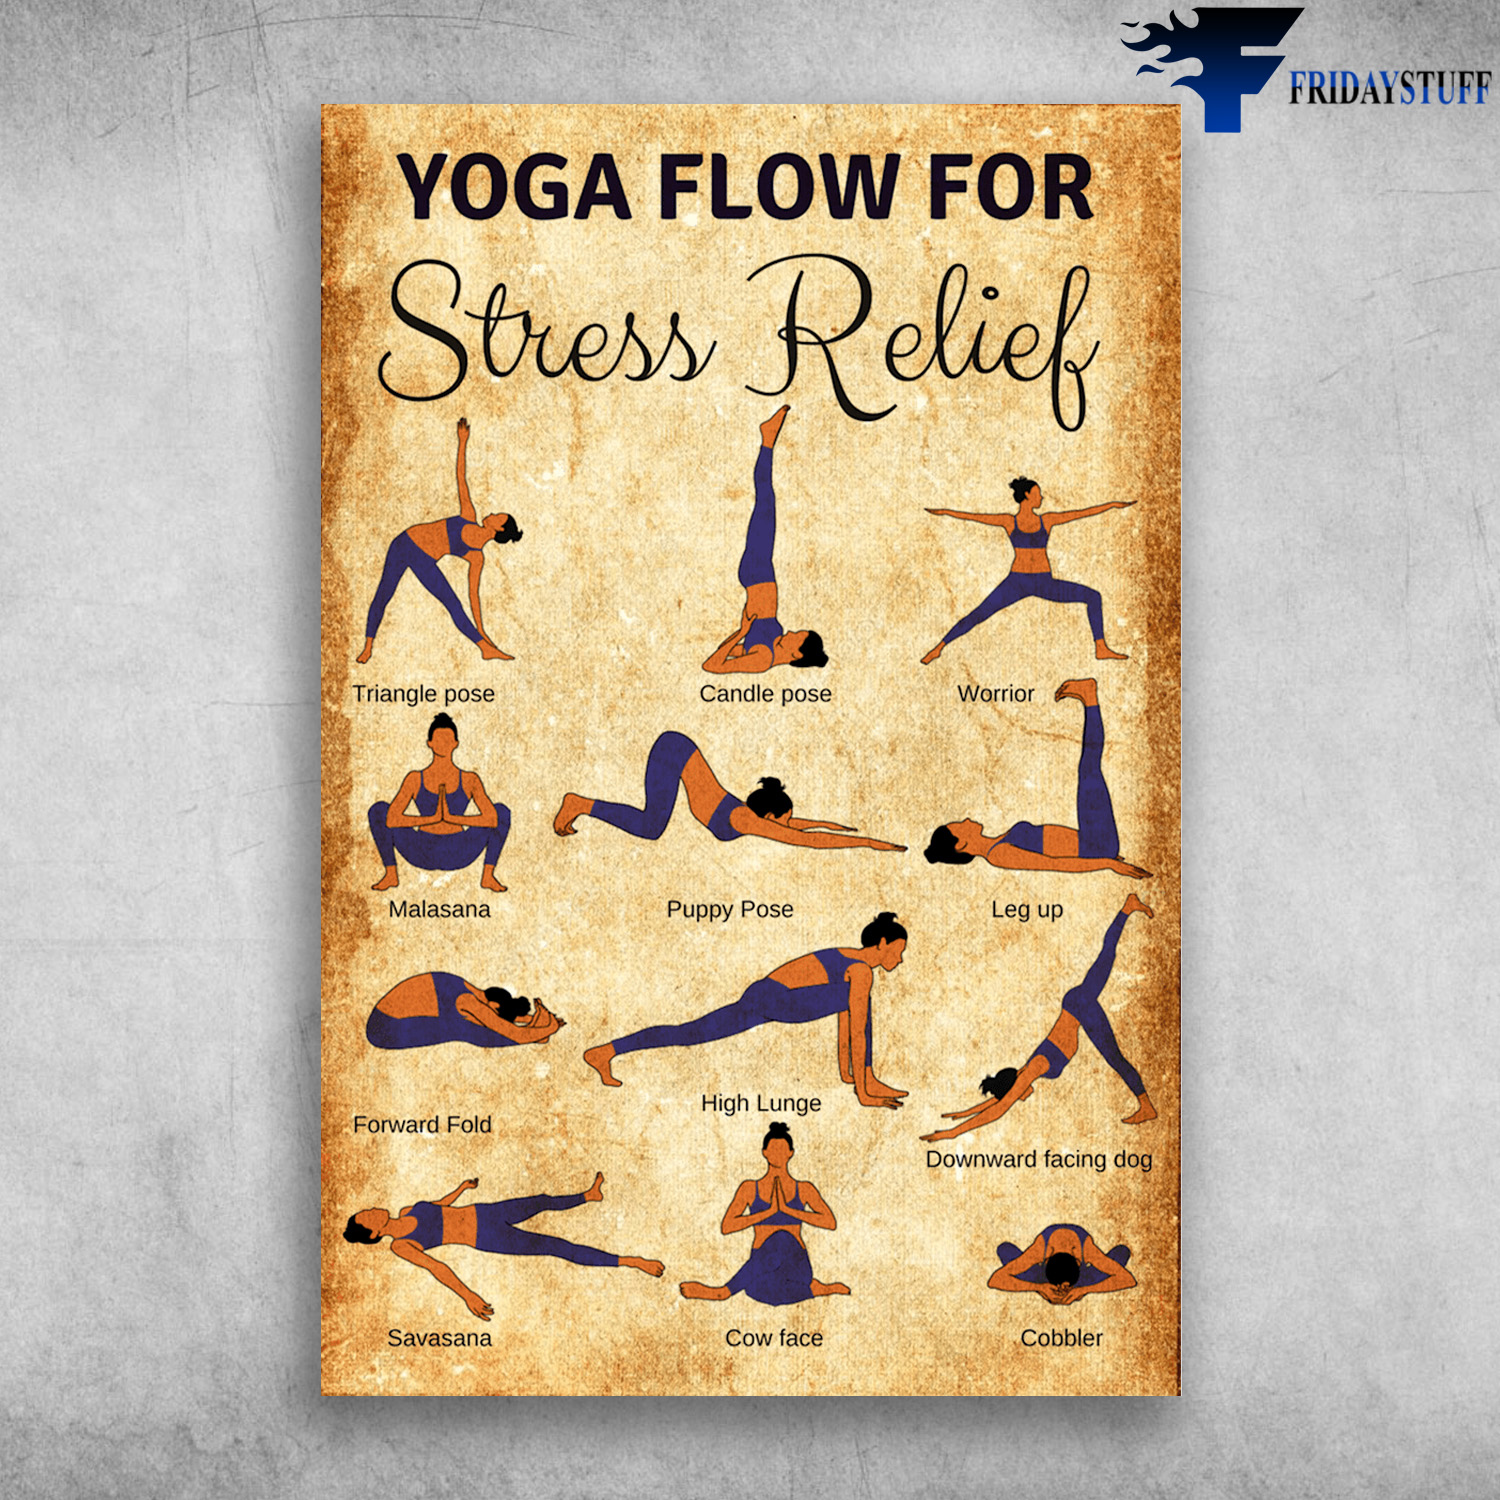 Yoga Poses - Yoga Flow For Stress Relief